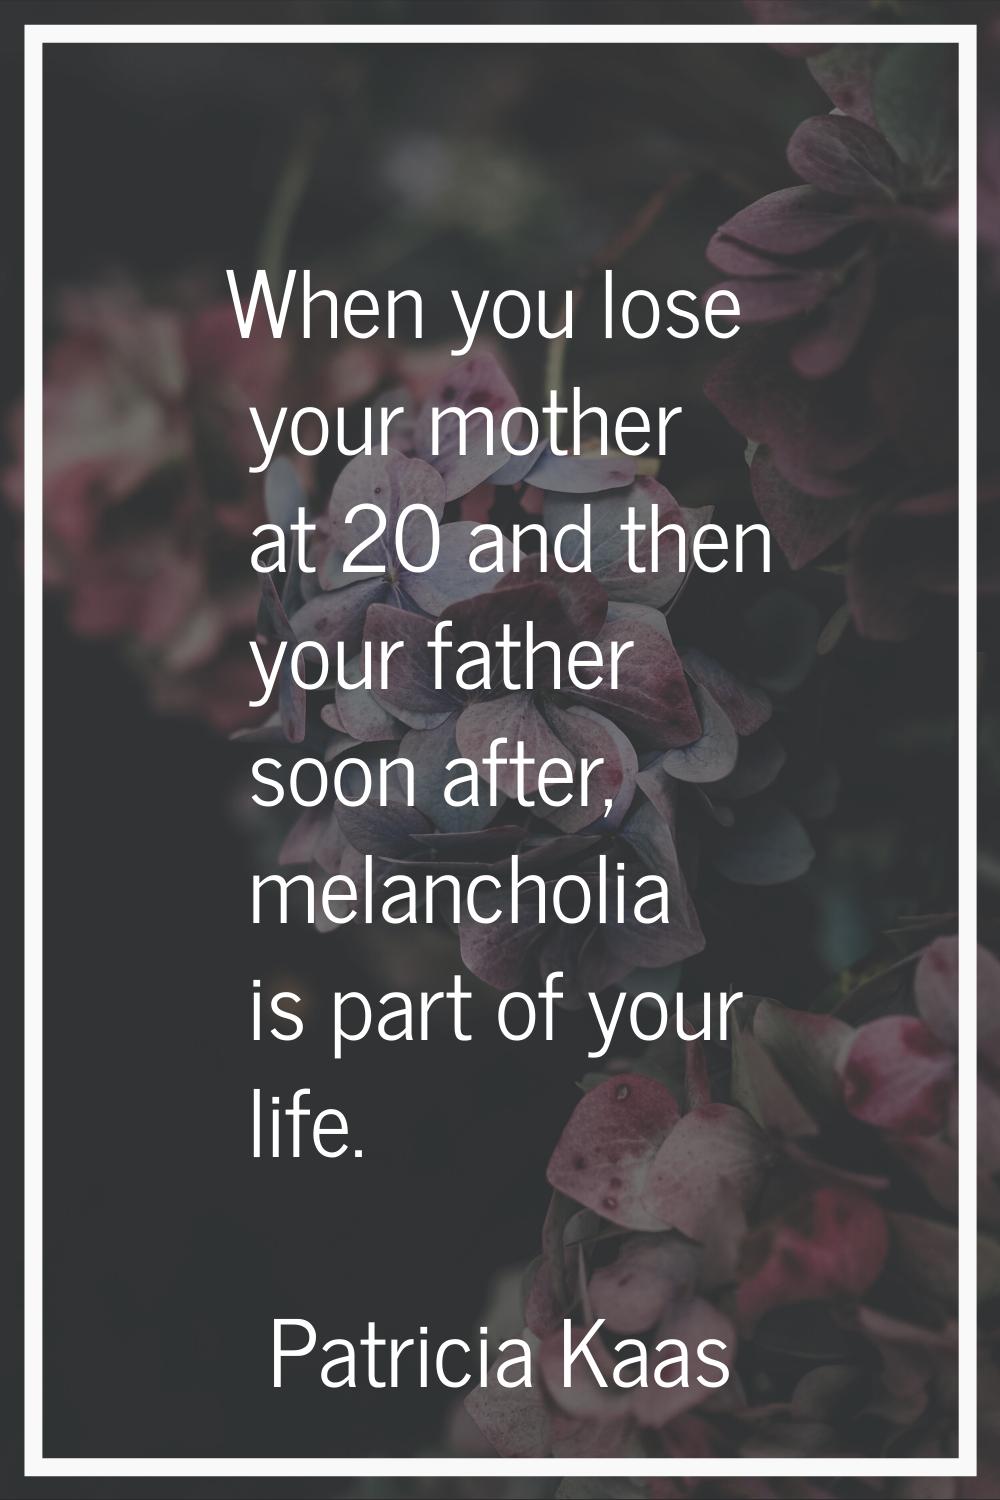 When you lose your mother at 20 and then your father soon after, melancholia is part of your life.